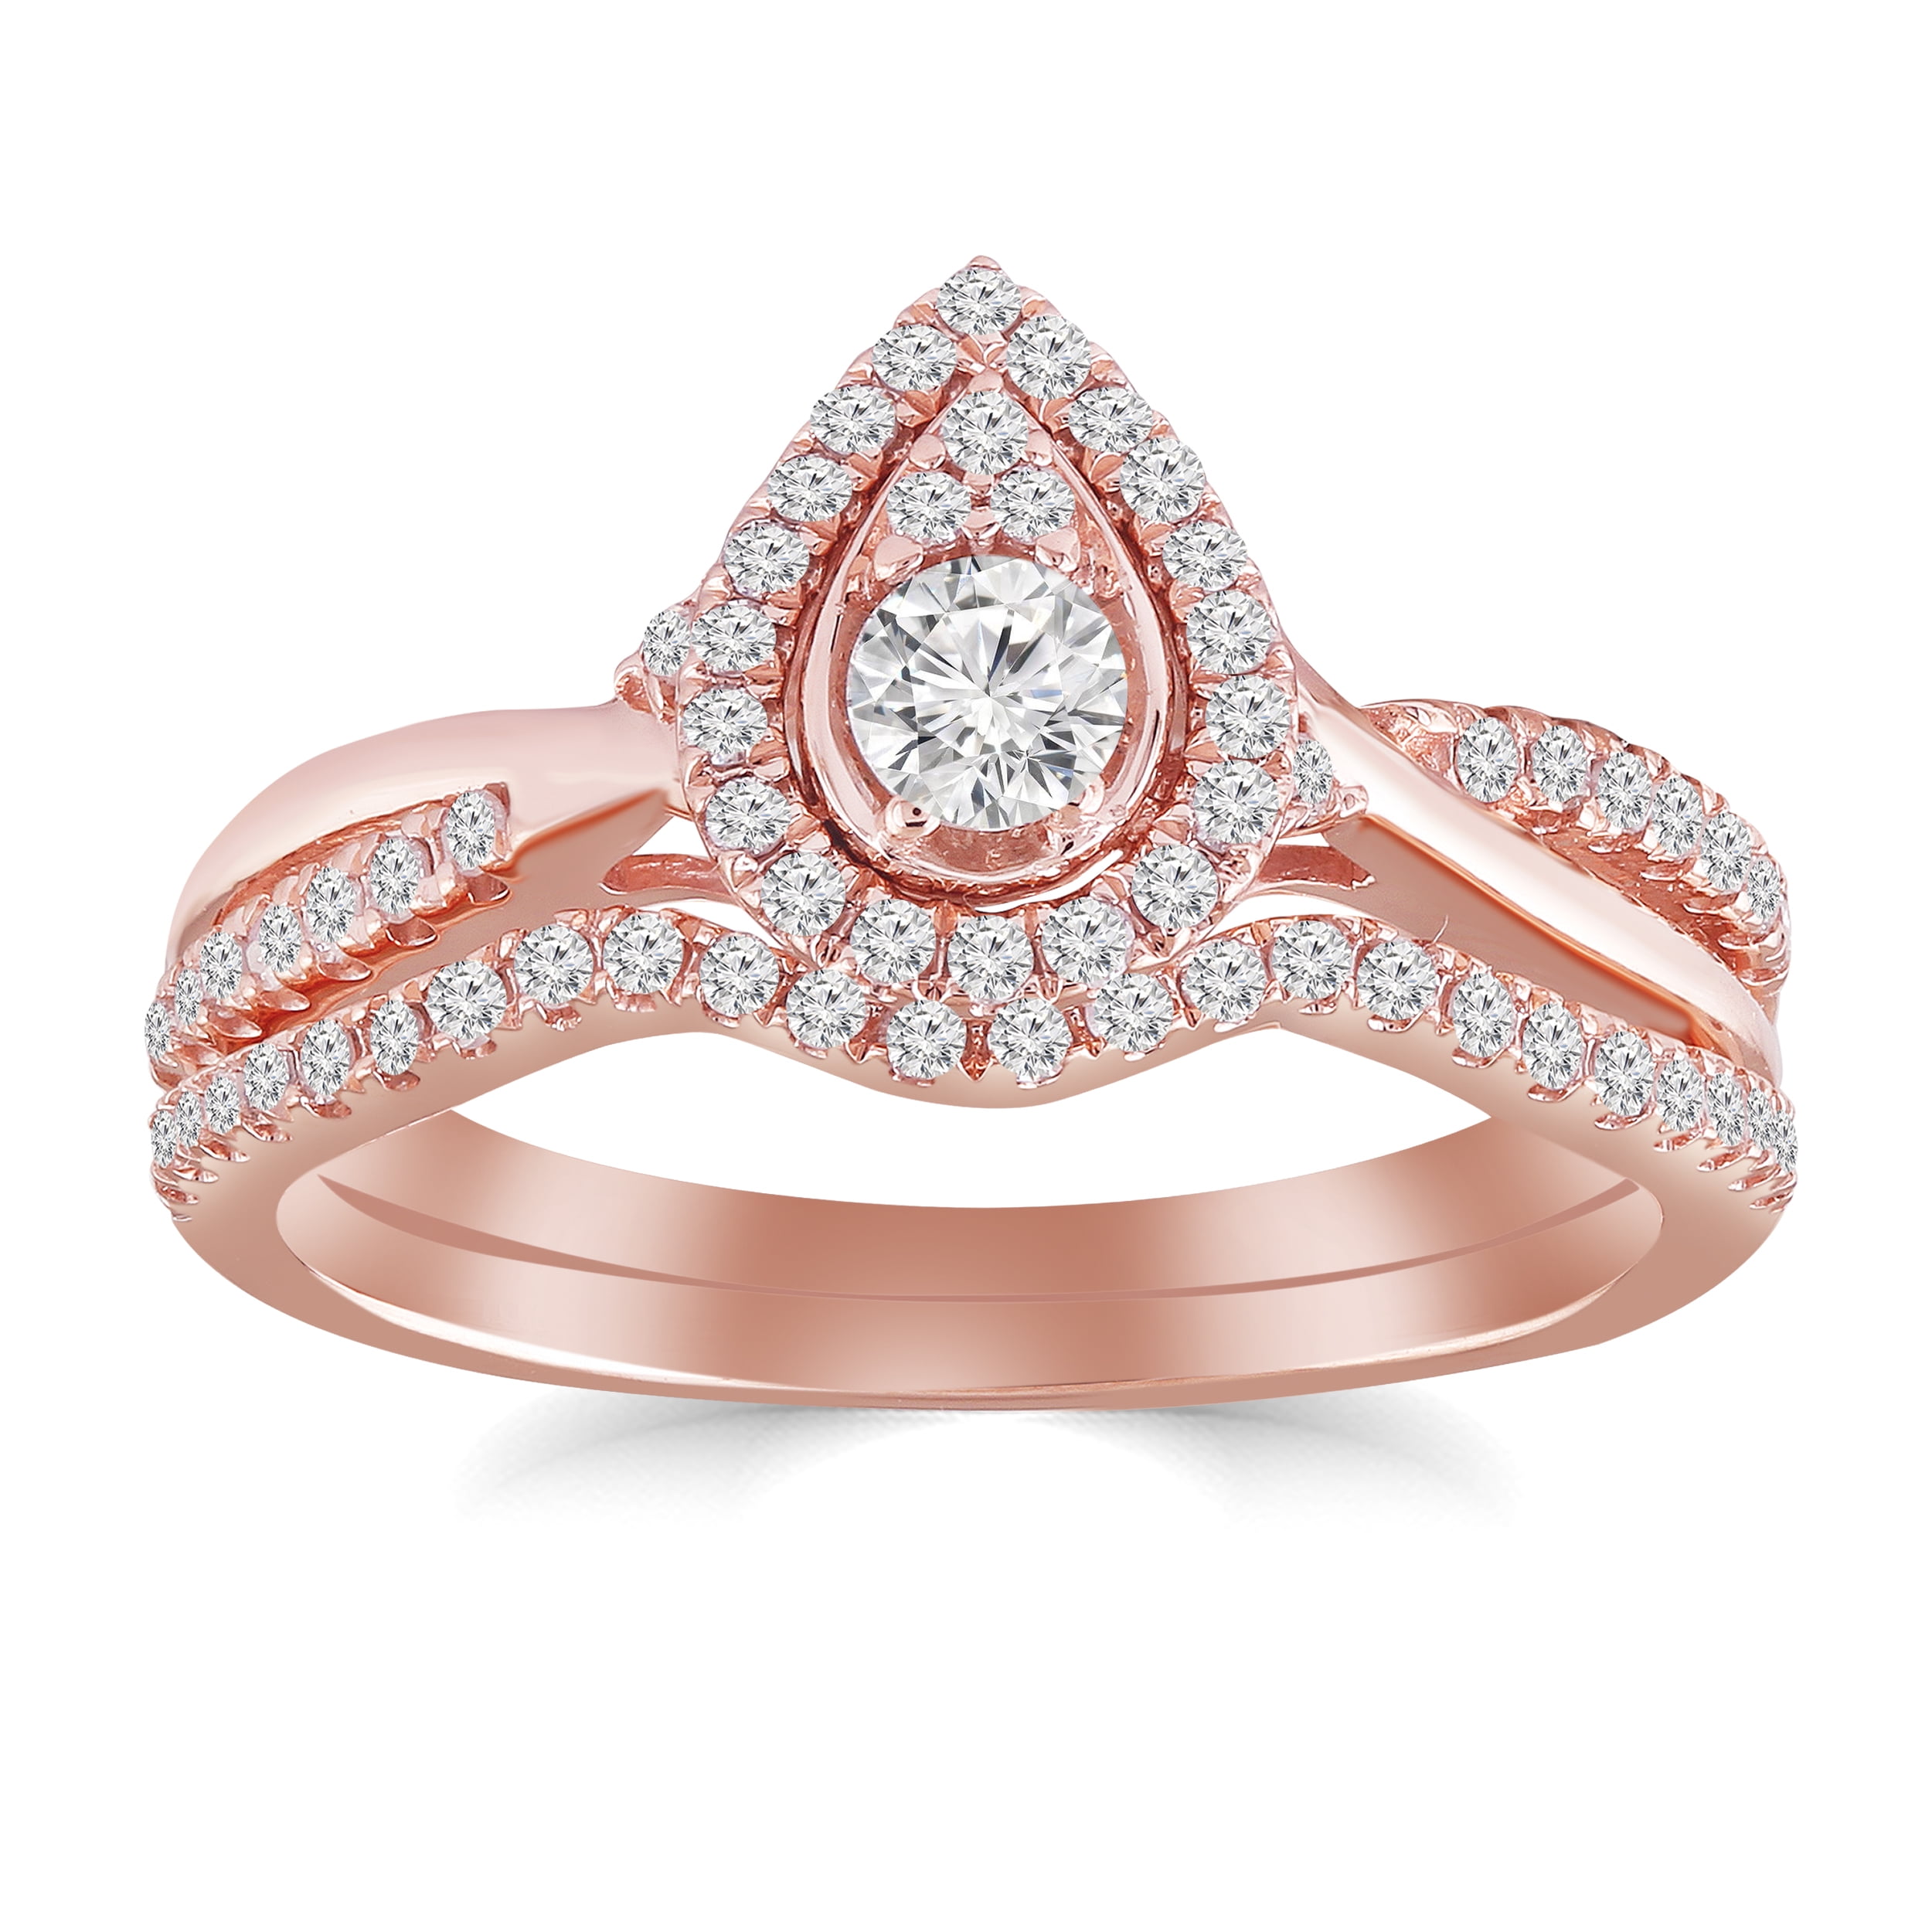 1/2 cttw Pear Shape Halo Diamond Bridal Ring Set with Twist Shank and  Contour Band (I-J, I2-I3) in 10K Rose Gold for Engagement and Wedding